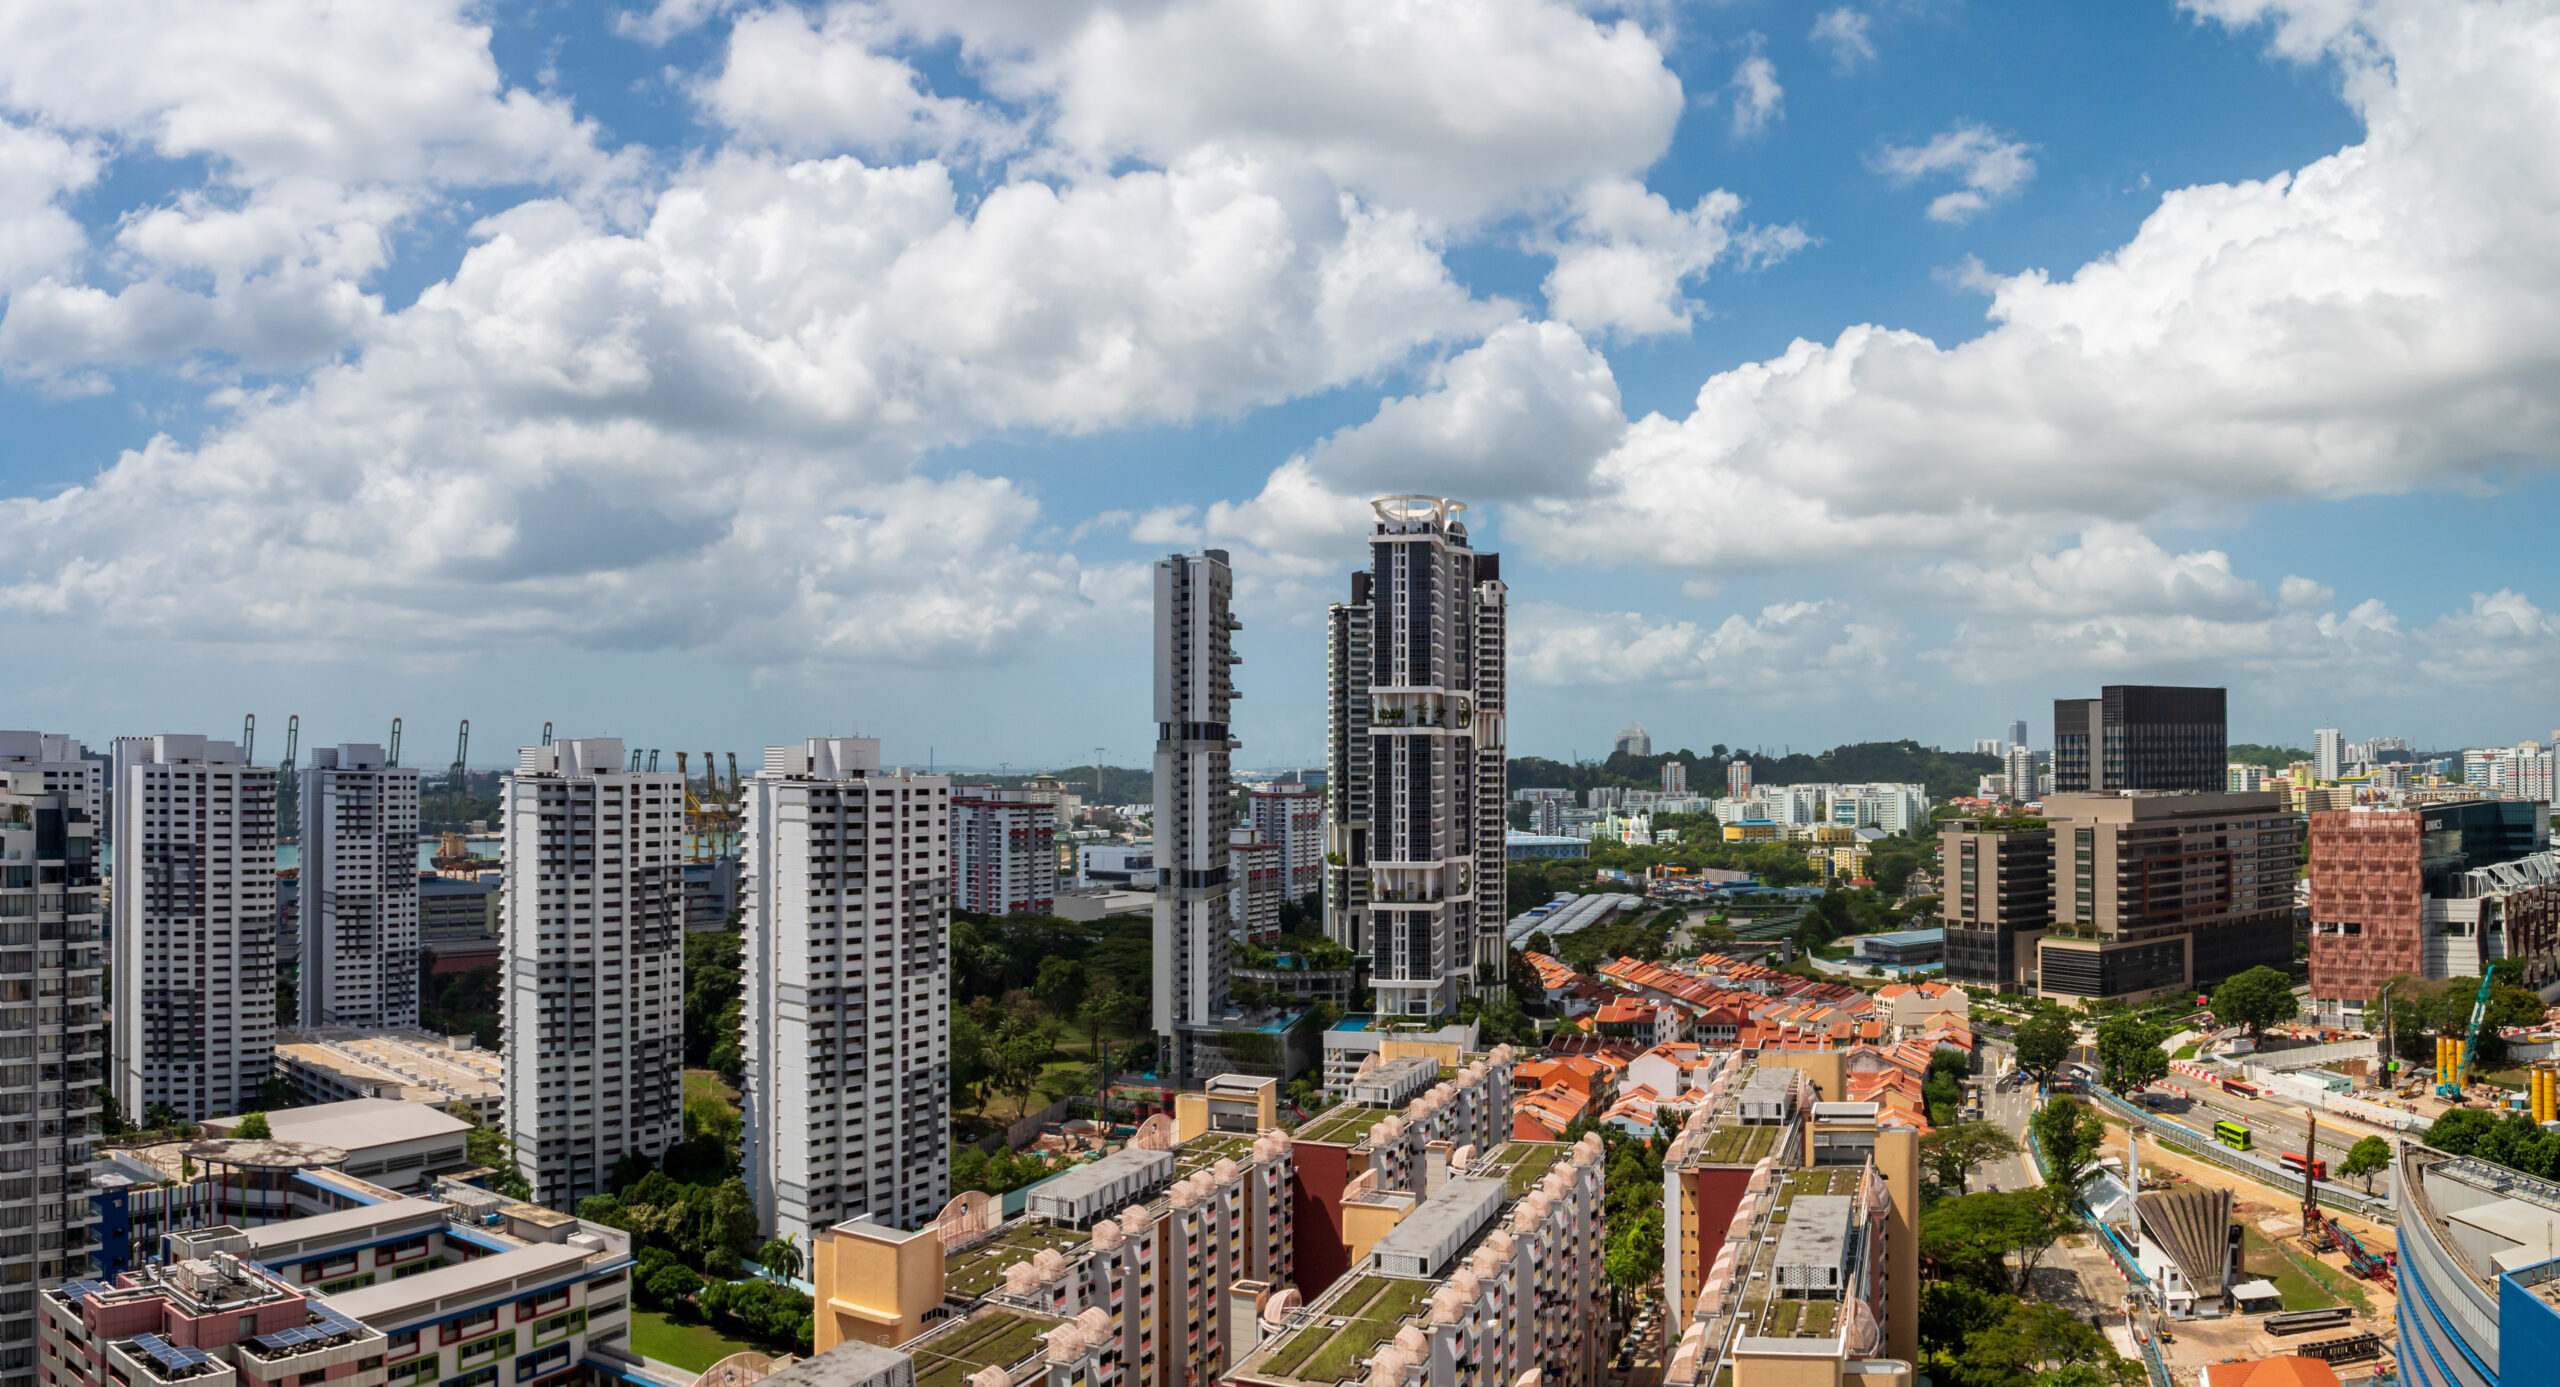 Aerial shot of Singapore’s CBD district in the Tanjong Pagar area